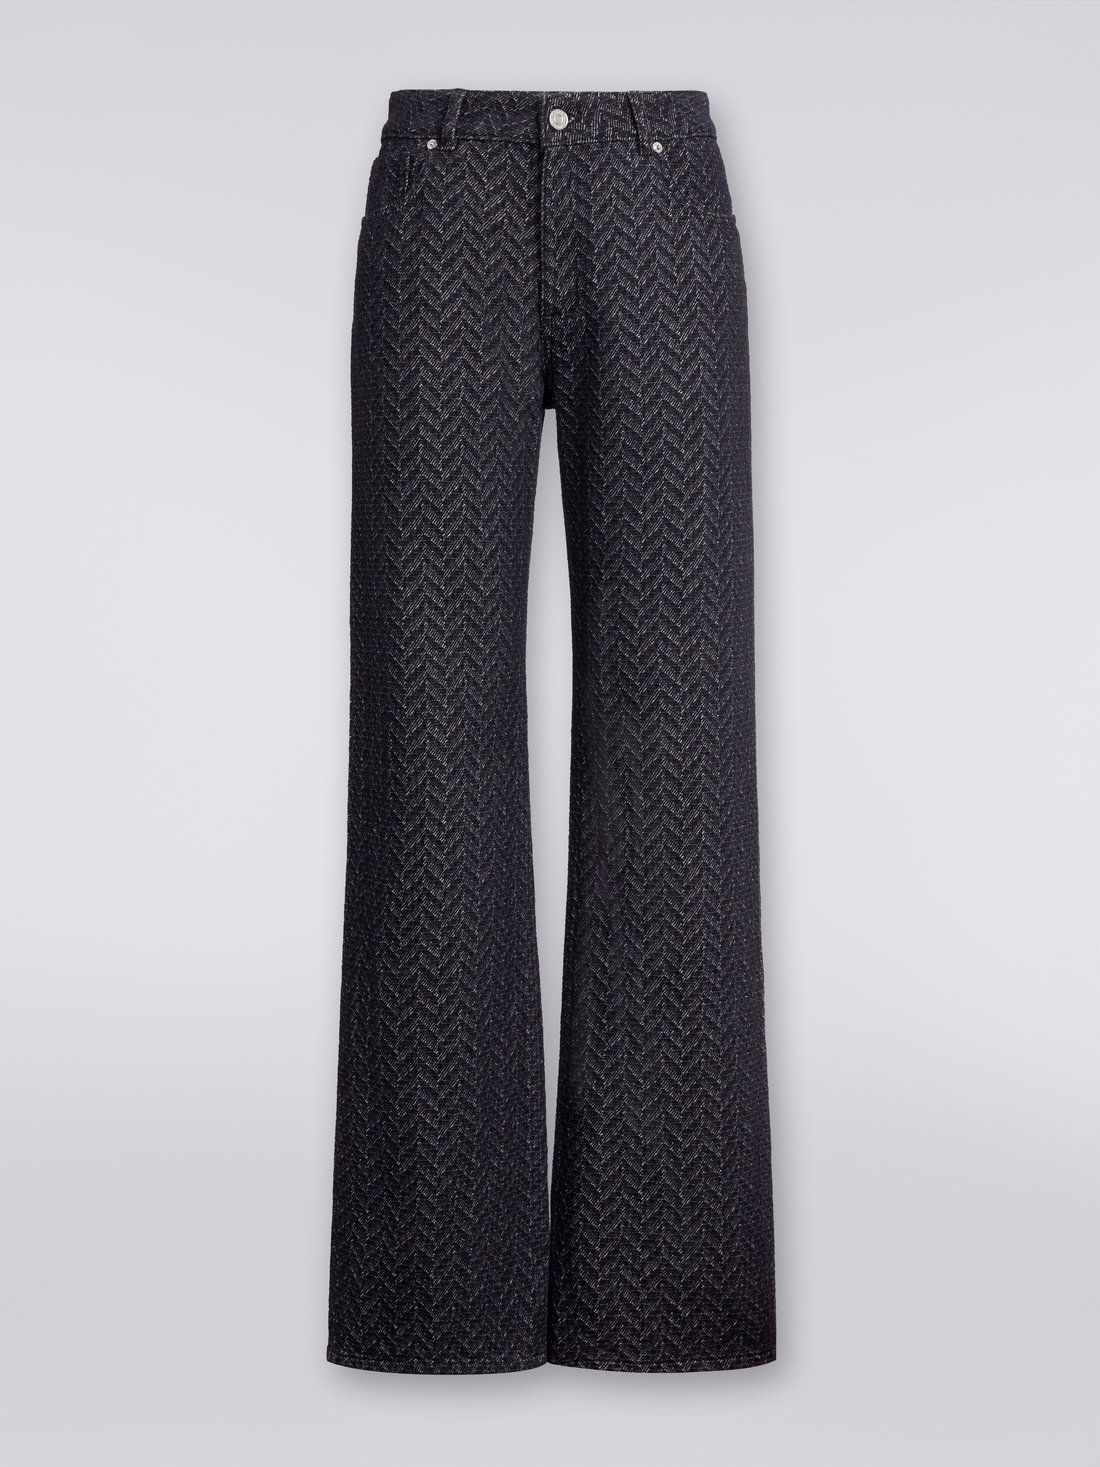 Five-pocket cotton trousers with zigzag pattern and embroidery on the back pocket  , Black    - DS23WI27BW00QDS91I5 - 0